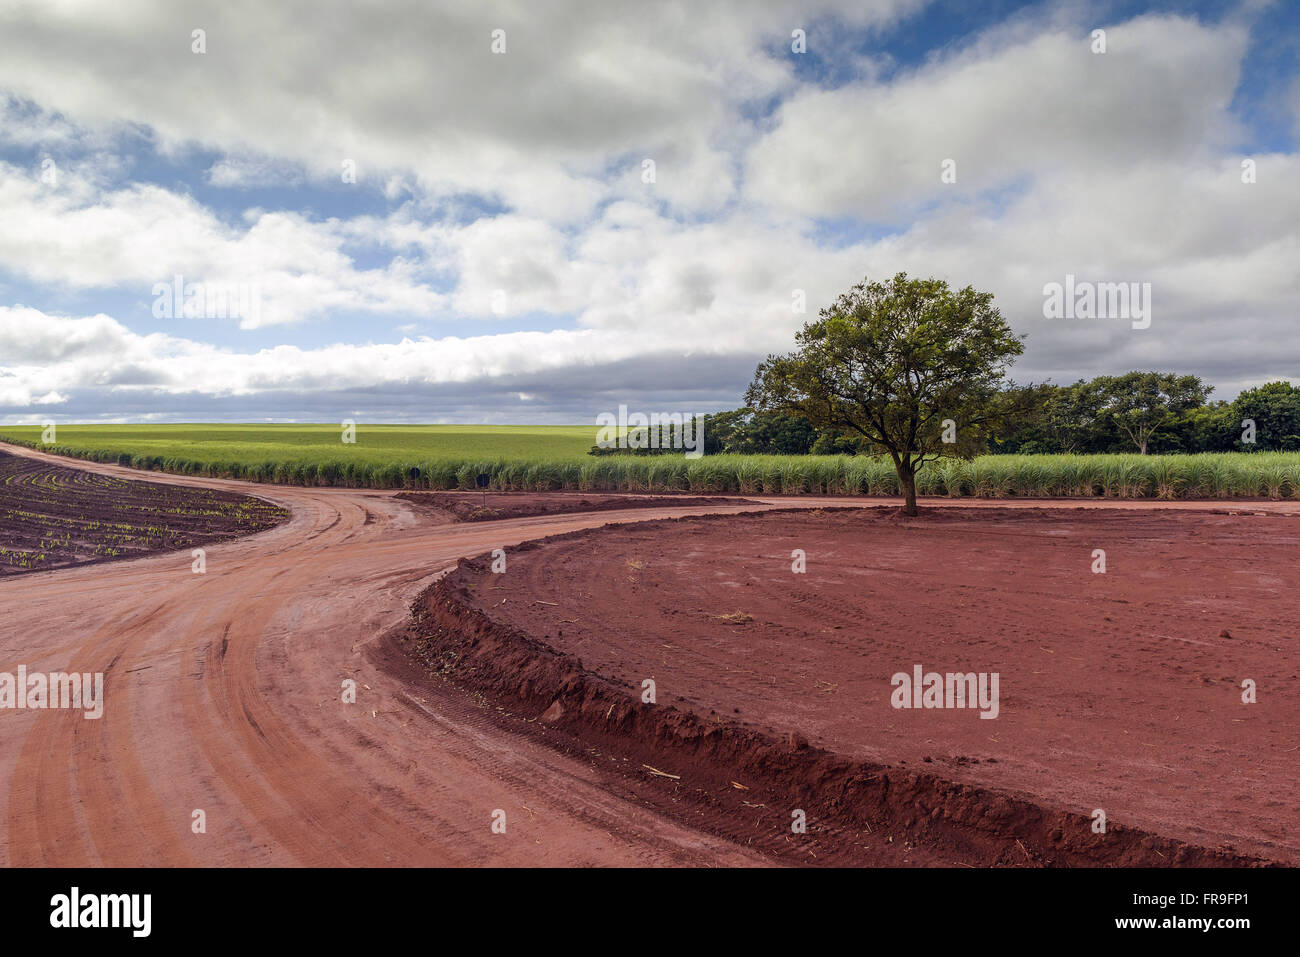 Dirt road junction near a sugarcane plantation in the countryside Stock Photo